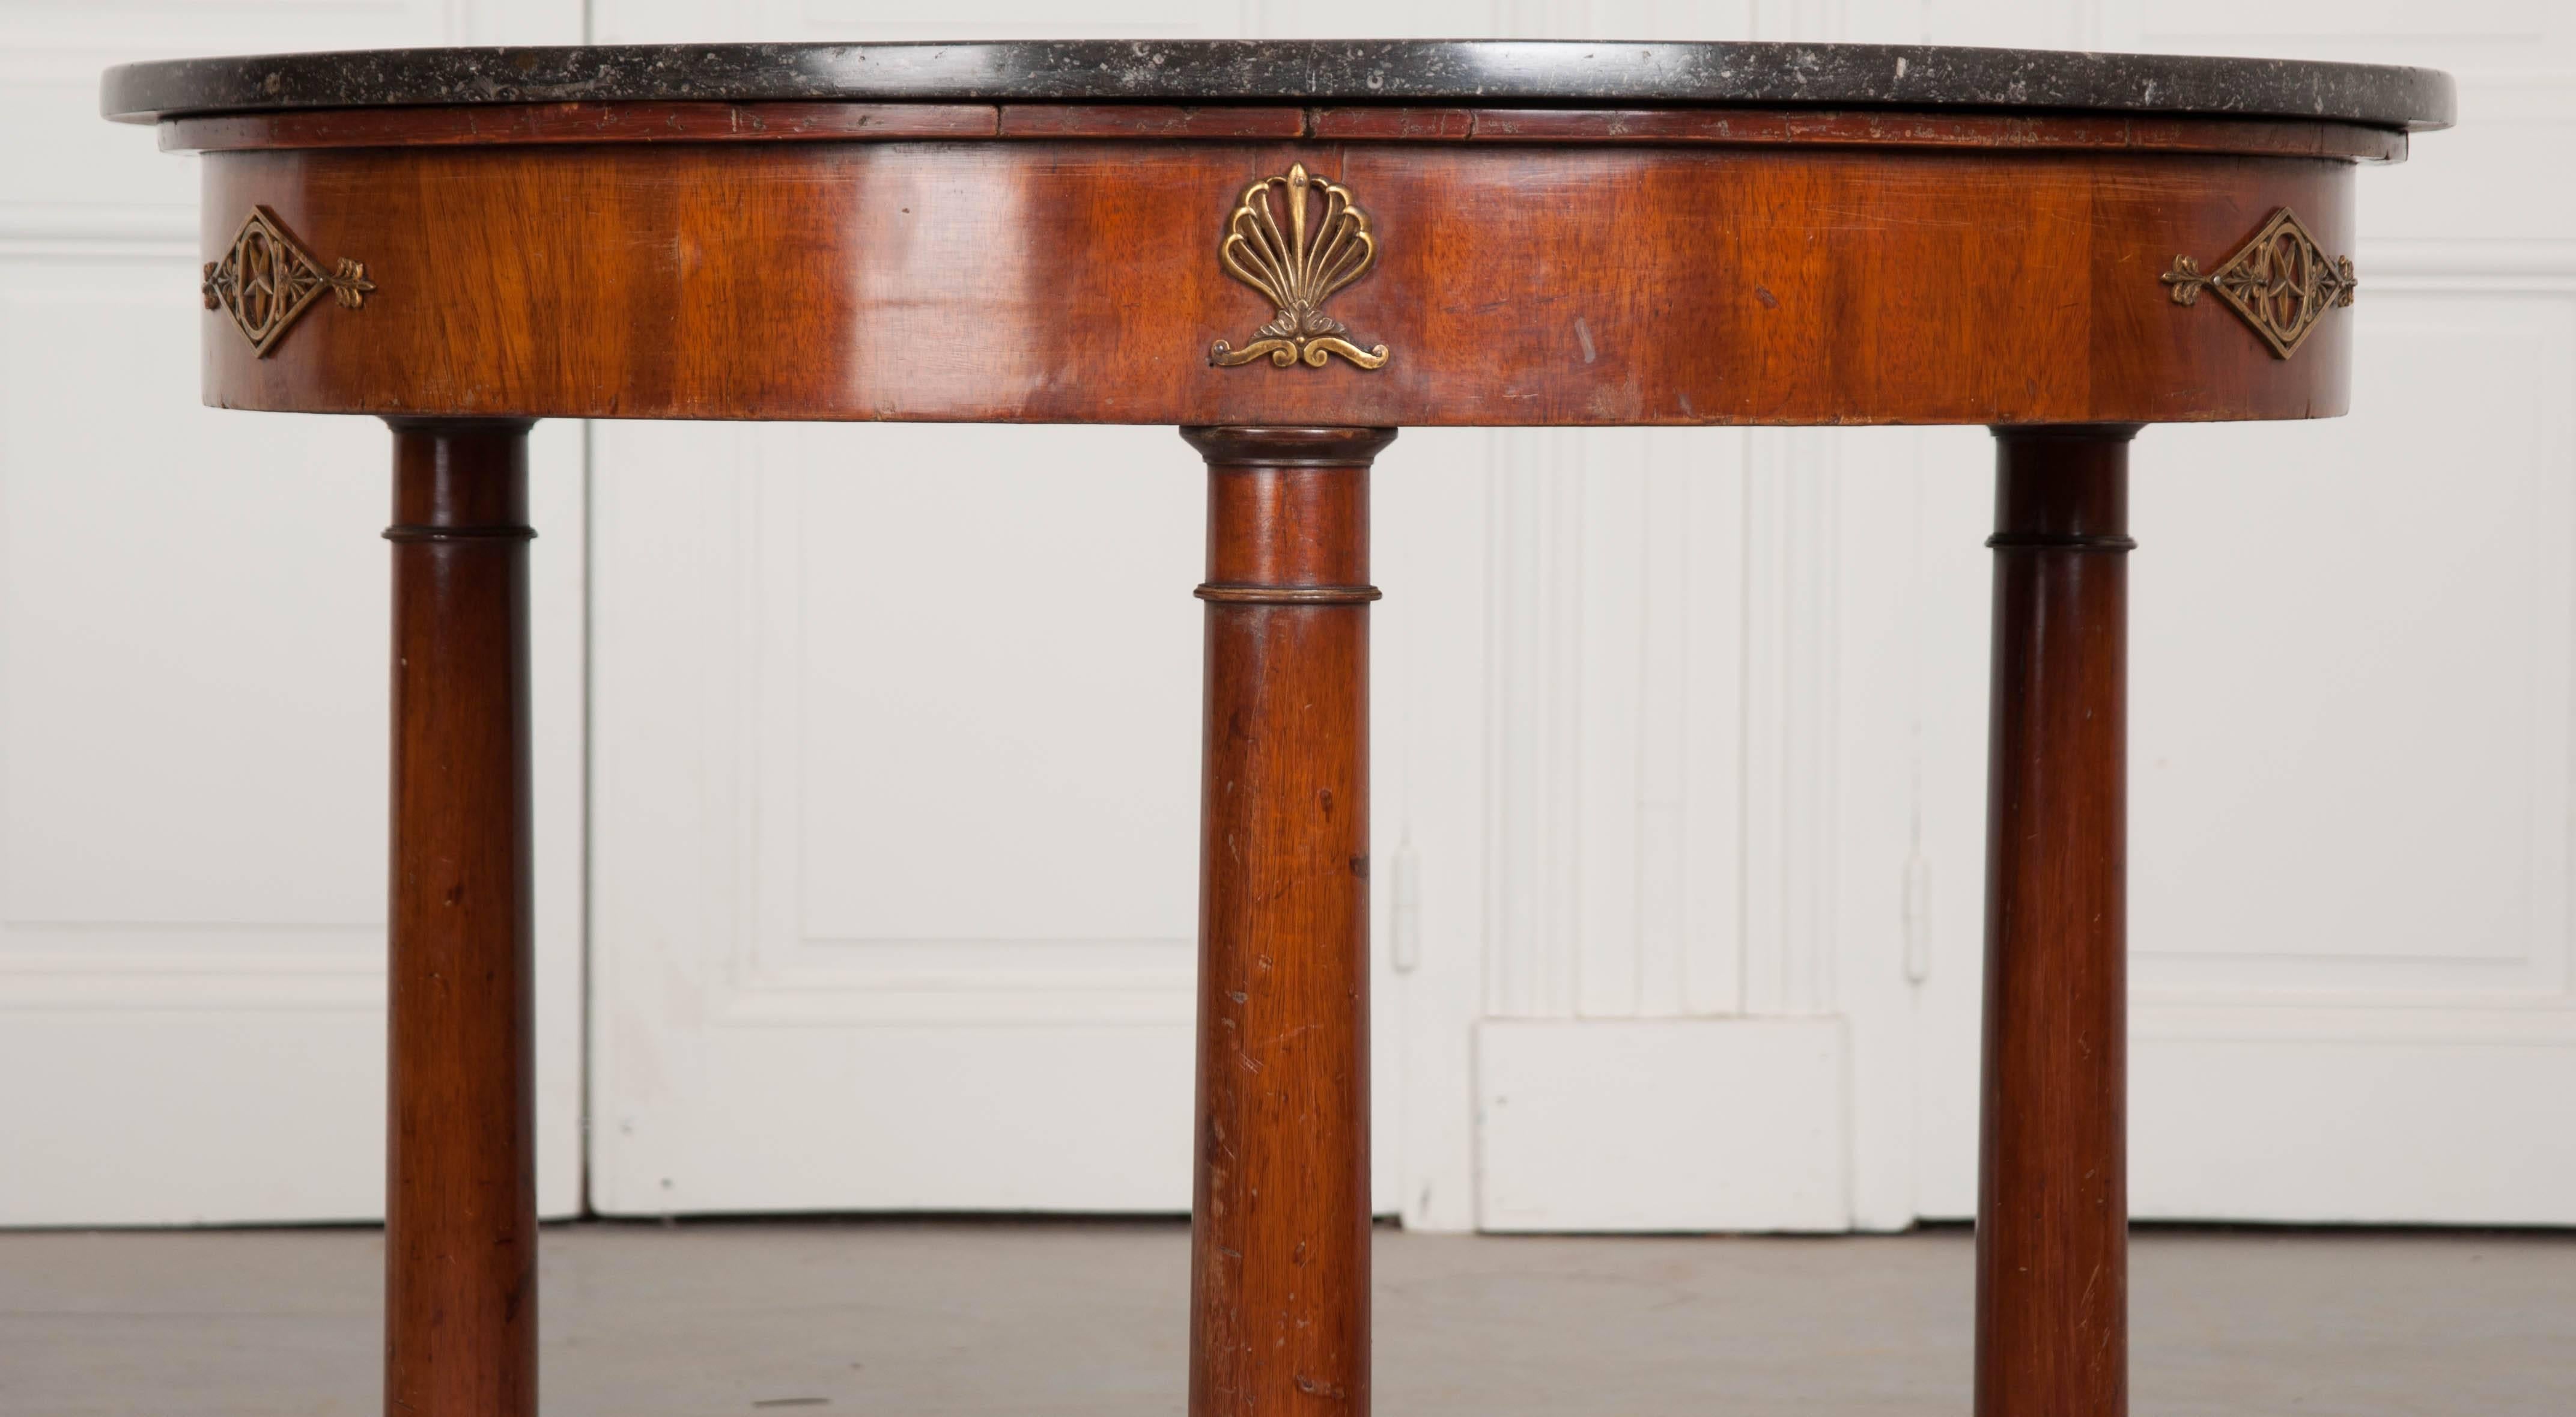 A handsome mahogany centre table, in the Empire style, from 19th century, France. The circular table is topped with a fabulous piece of black fossil marble, filled with tiny ancient sea creatures that have become set in stone. The apron is decorated